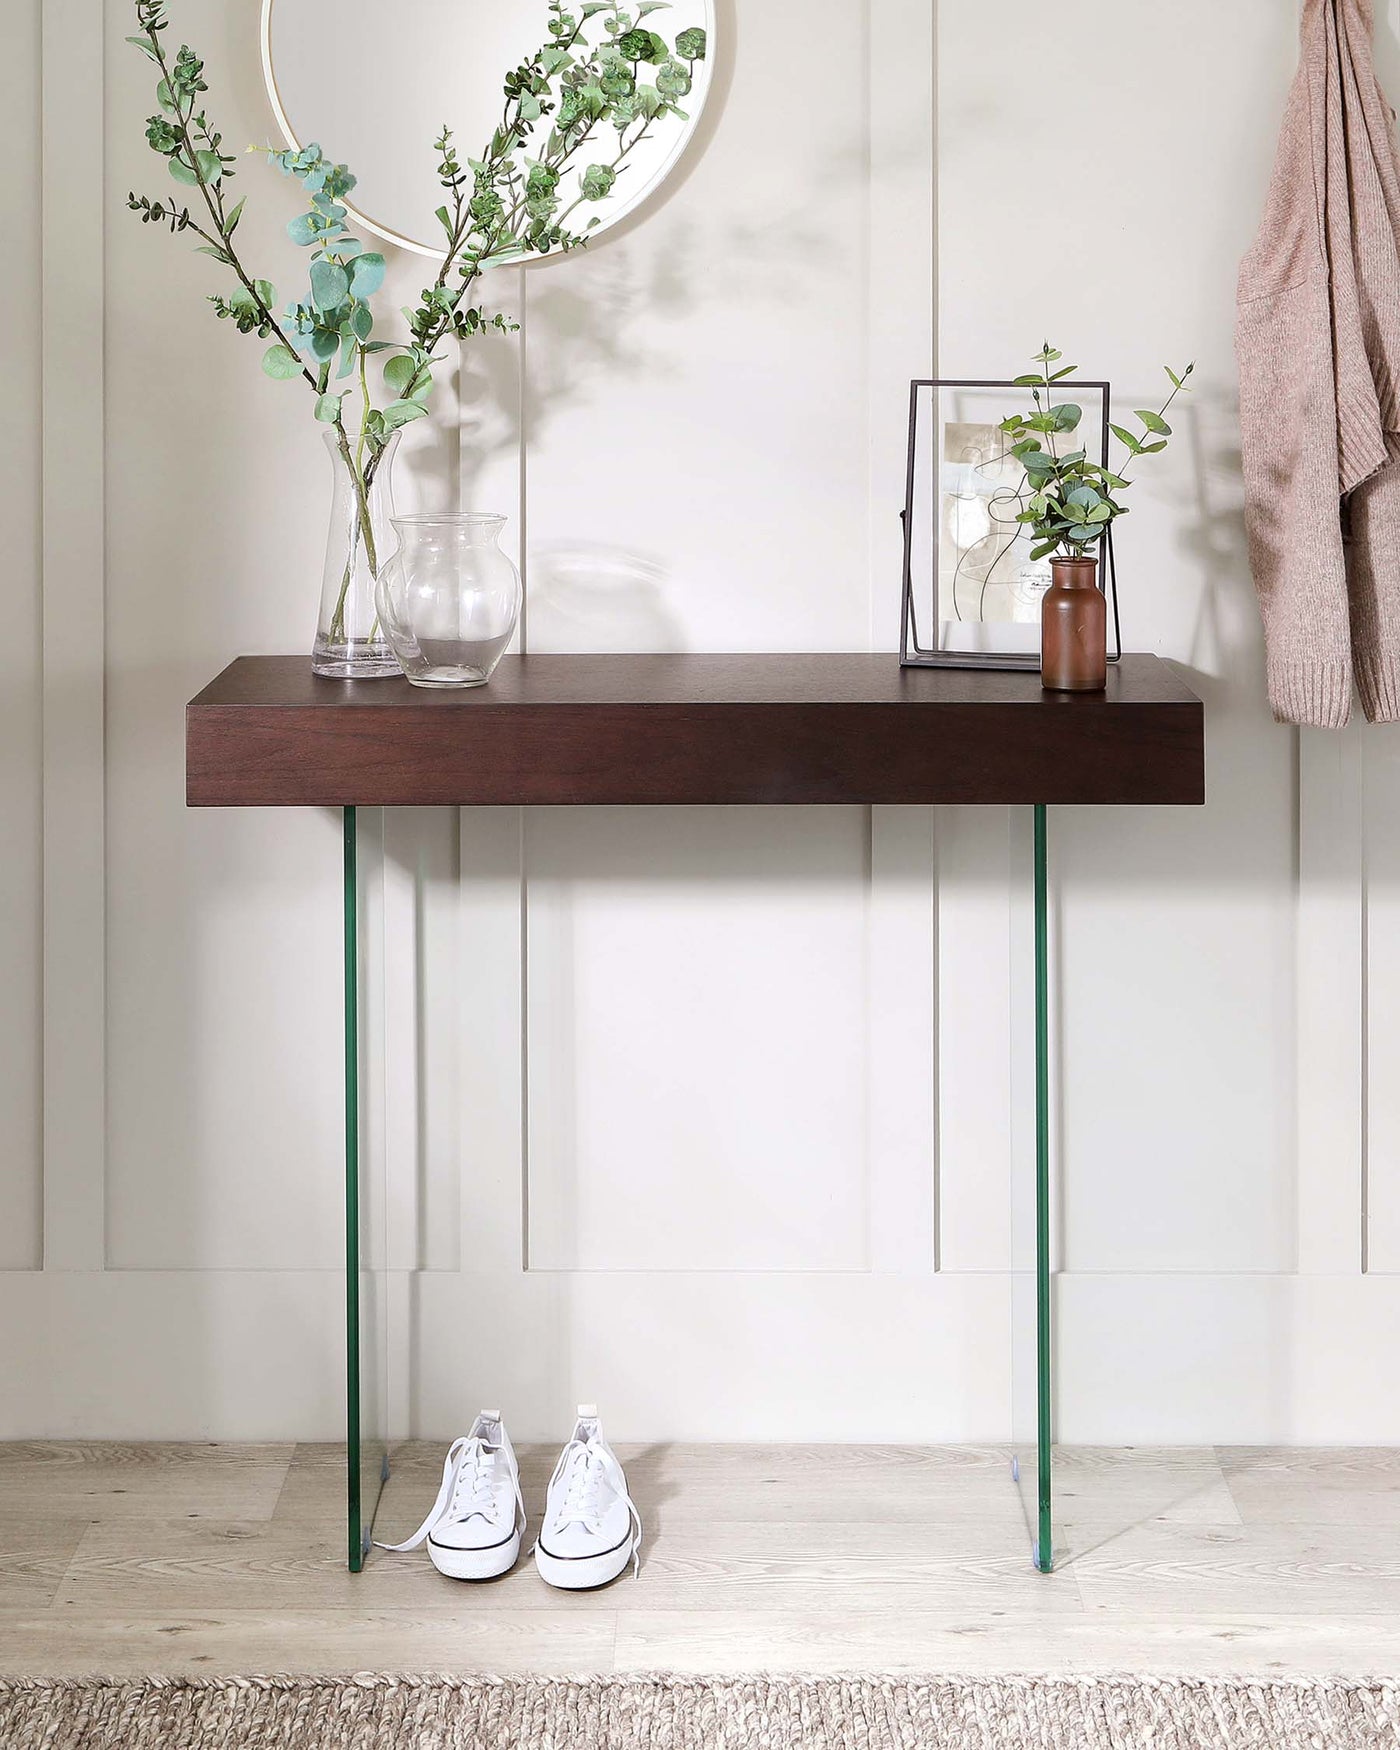 Modern minimalist dark wooden console table with clear glass legs. The table is adorned with decorative items including a tall vase with greenery, a spherical mirror above it, a glass candle holder, and a small plant in a brown vase. A pair of white sneakers is placed neatly below the table, on a light wooden floor adjacent to a textured rug.